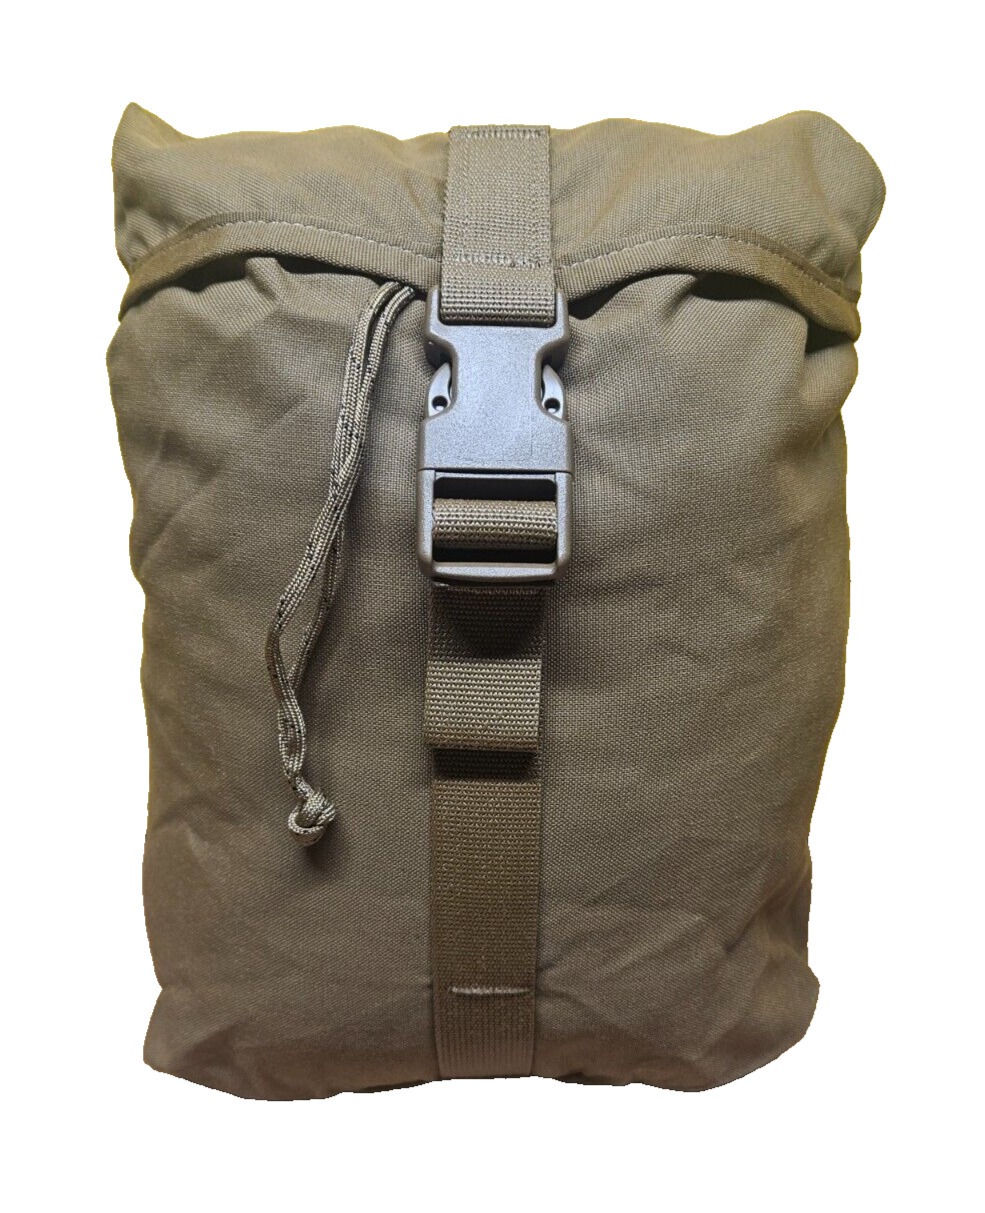 NEW AUTHENTIC USGI SUSTAINMENT POUCH - COYOTE - MOLLE II FILBE USMC MILITARY CIF